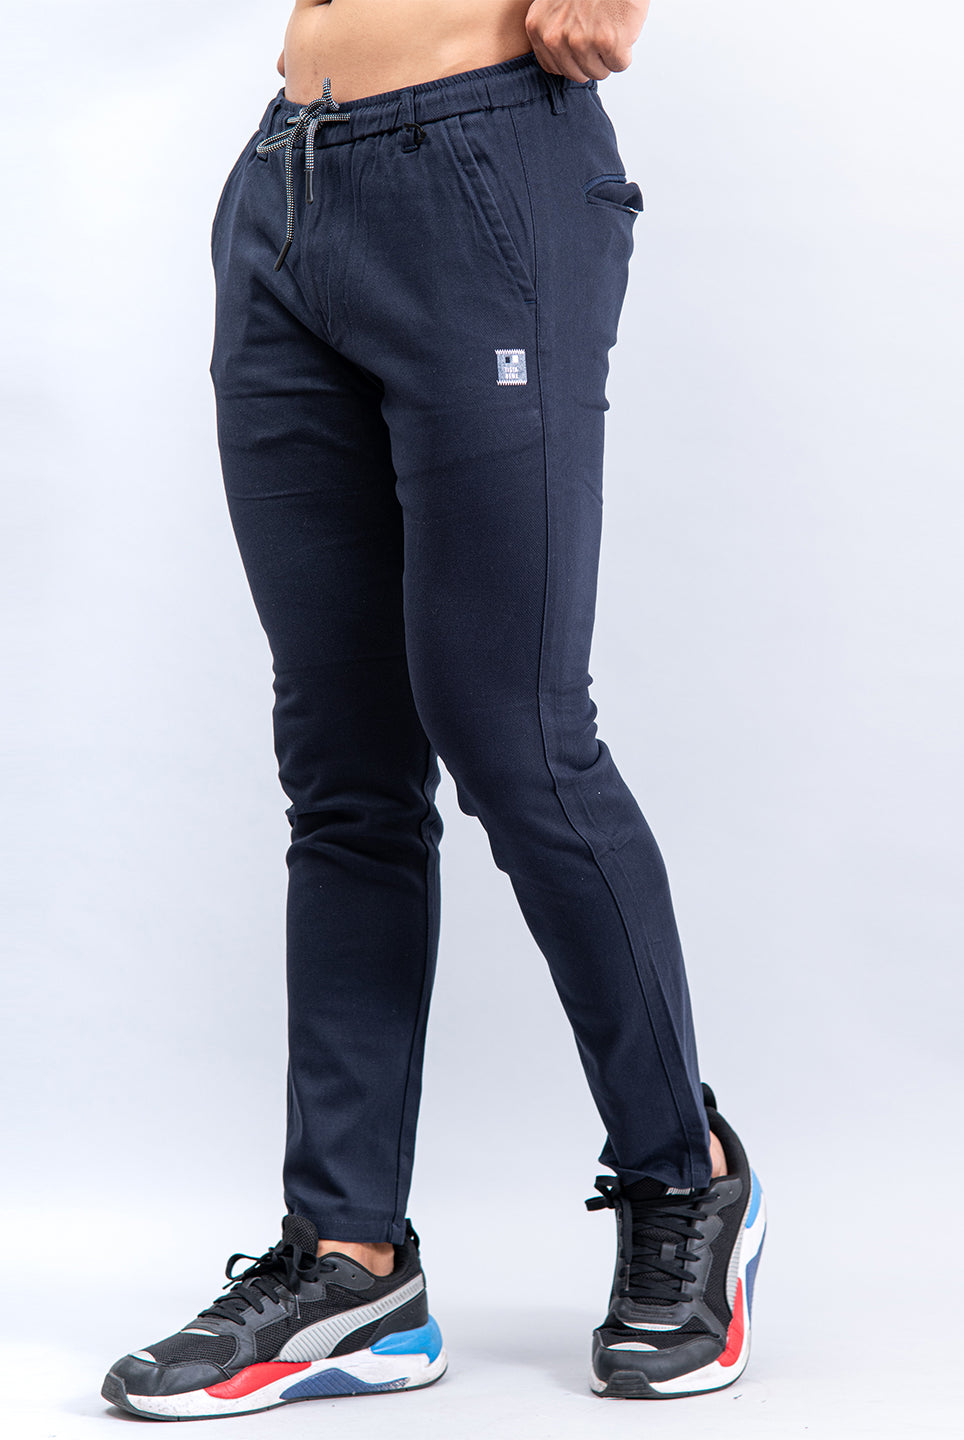 navy joggers for men